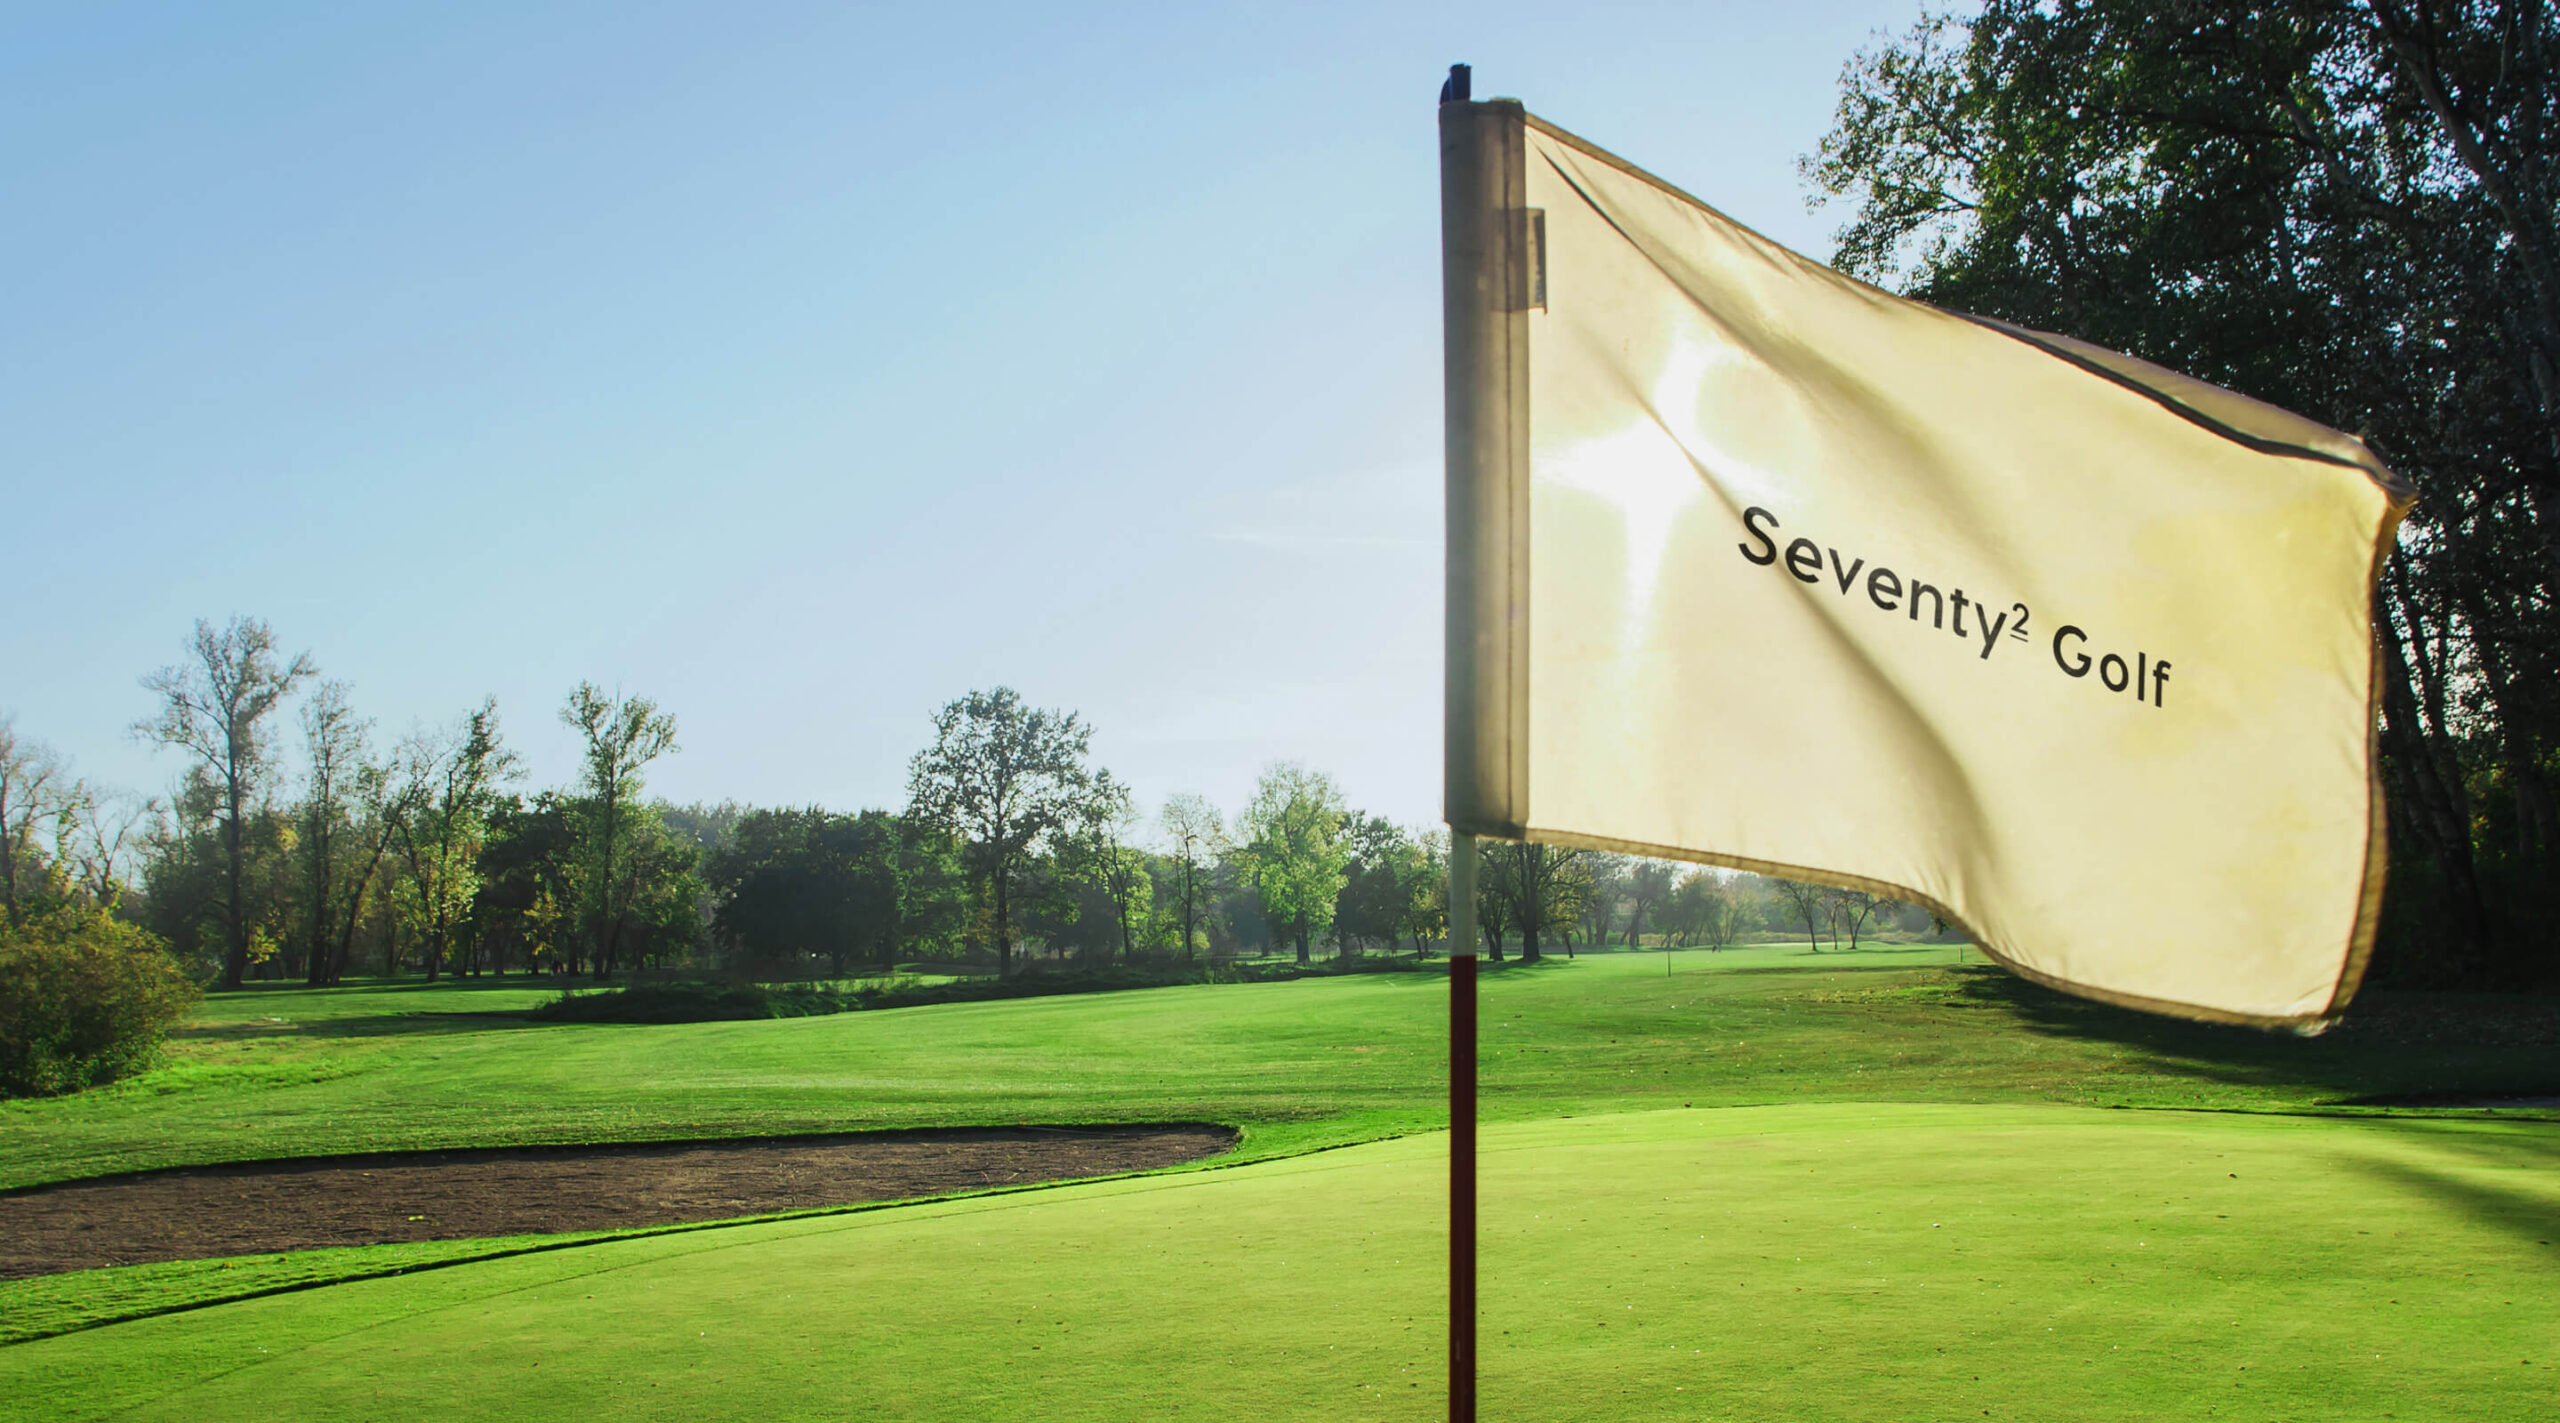 Flag featuring the logo used to signal a hole in a golf course